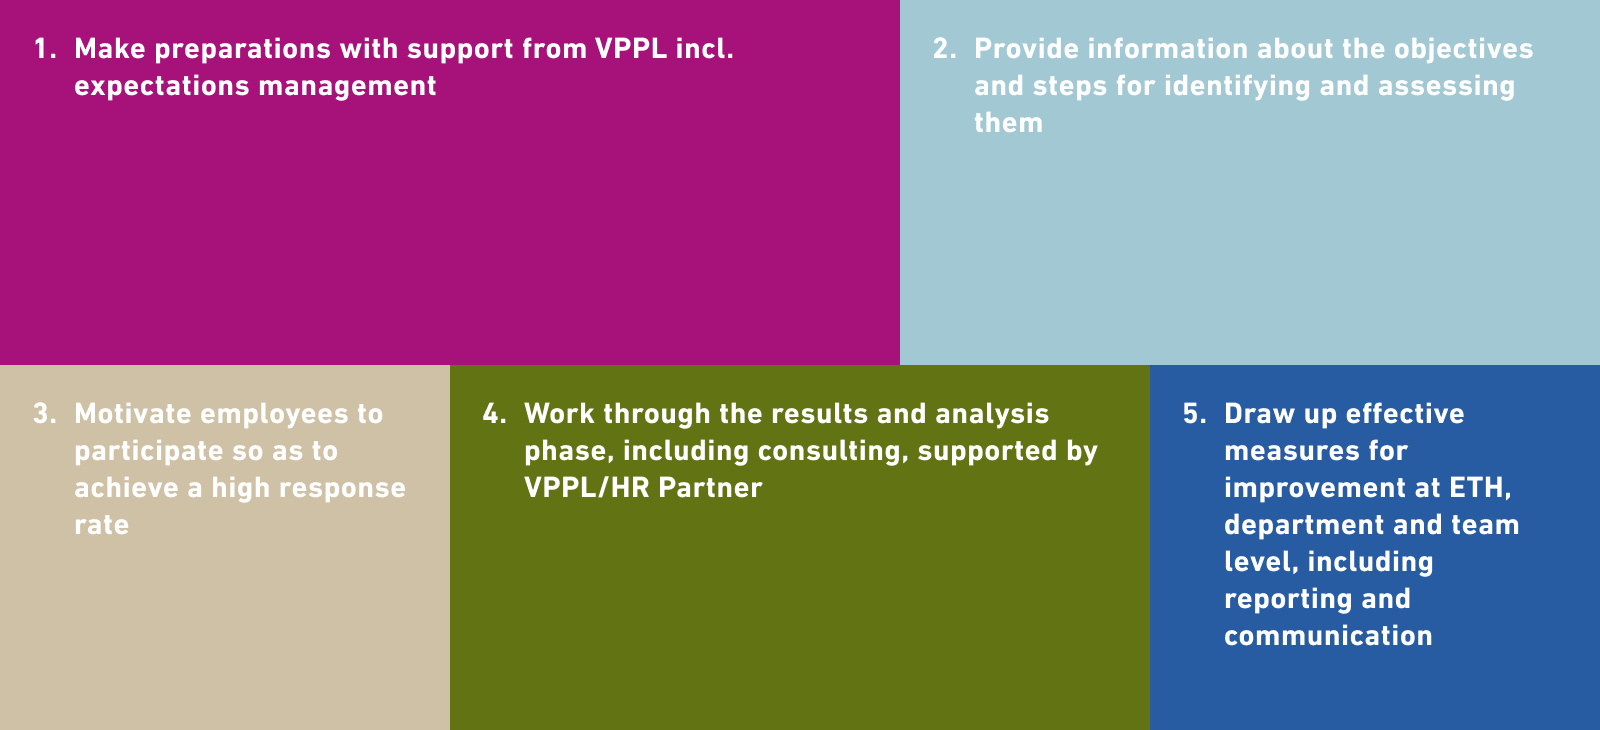 1. Make preparations with support from VPPL incl. expectations management  2. Provide information about the objectives and steps for identifying and assessing them 3. Motivate employees to participate so as to achieve a high response rate 4. Work through the results and analysis phase, including consulting, supported by  VPPL/HR Partner 5. Draw up effective measures for improvement at ETH, research area and team level, including reporting and communication